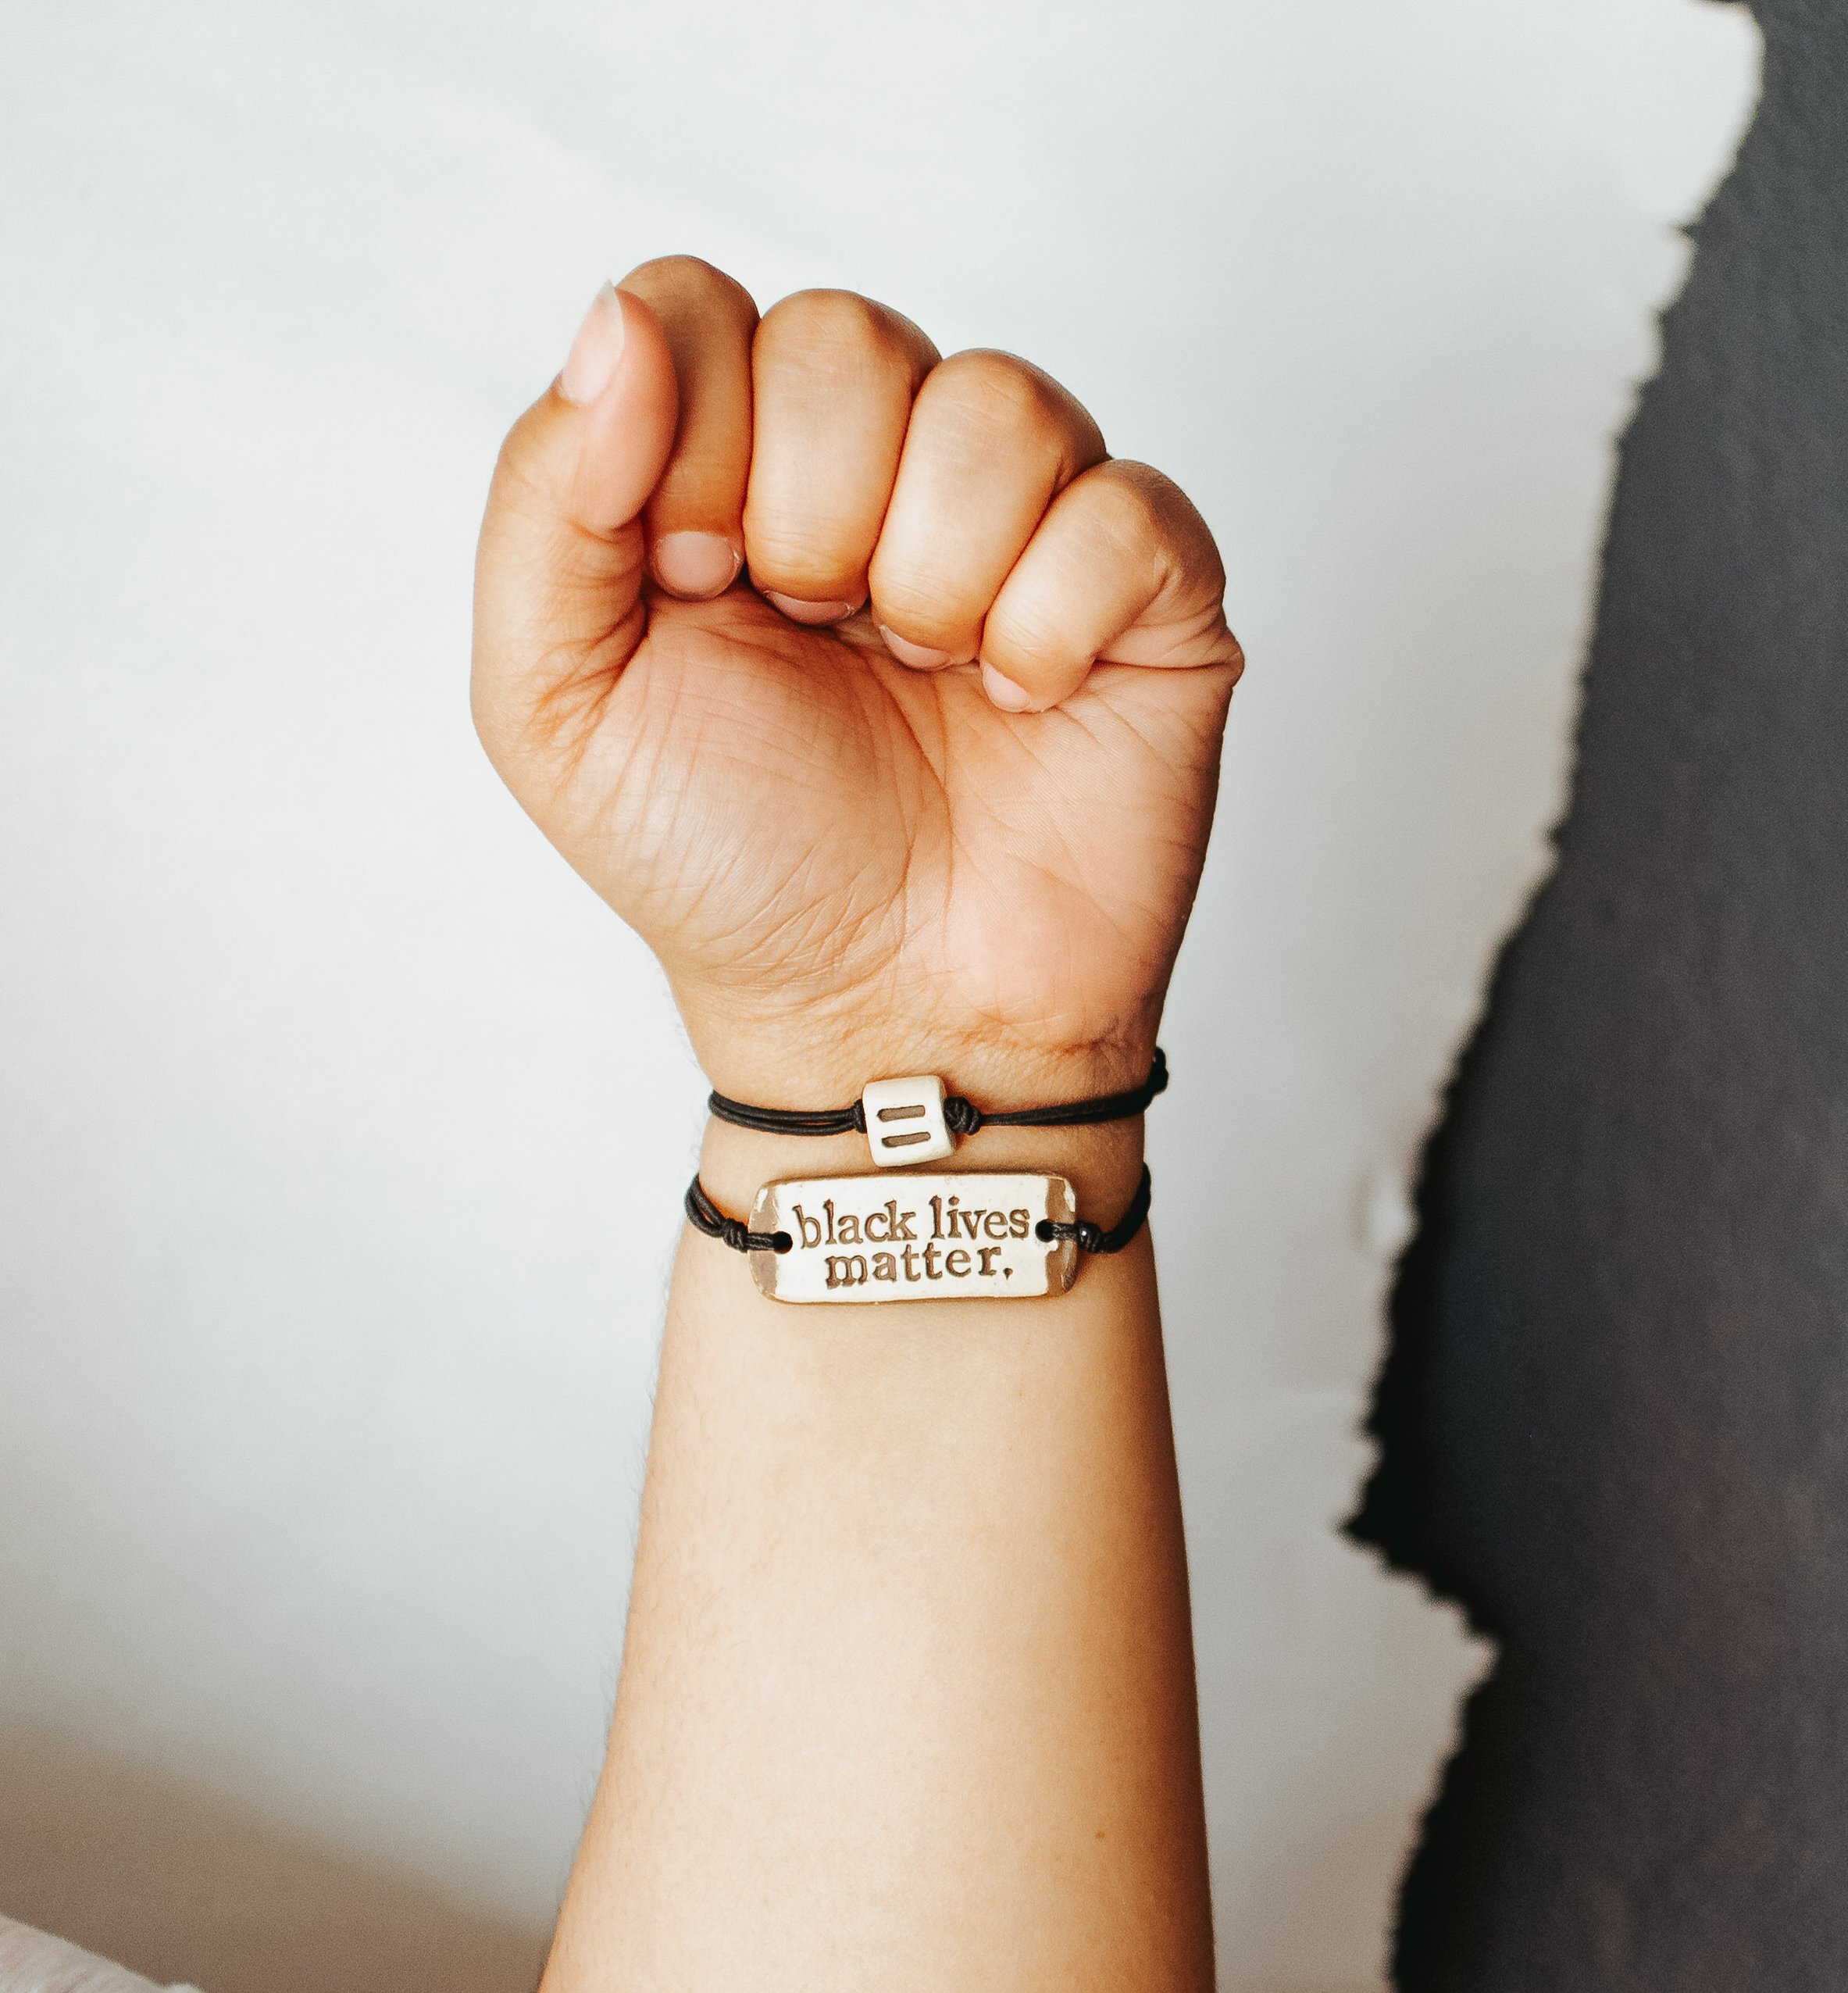 10 best gifts for teens : Social justice bracelets from MudLove + a donation | Small Business Holiday Gifts 2020